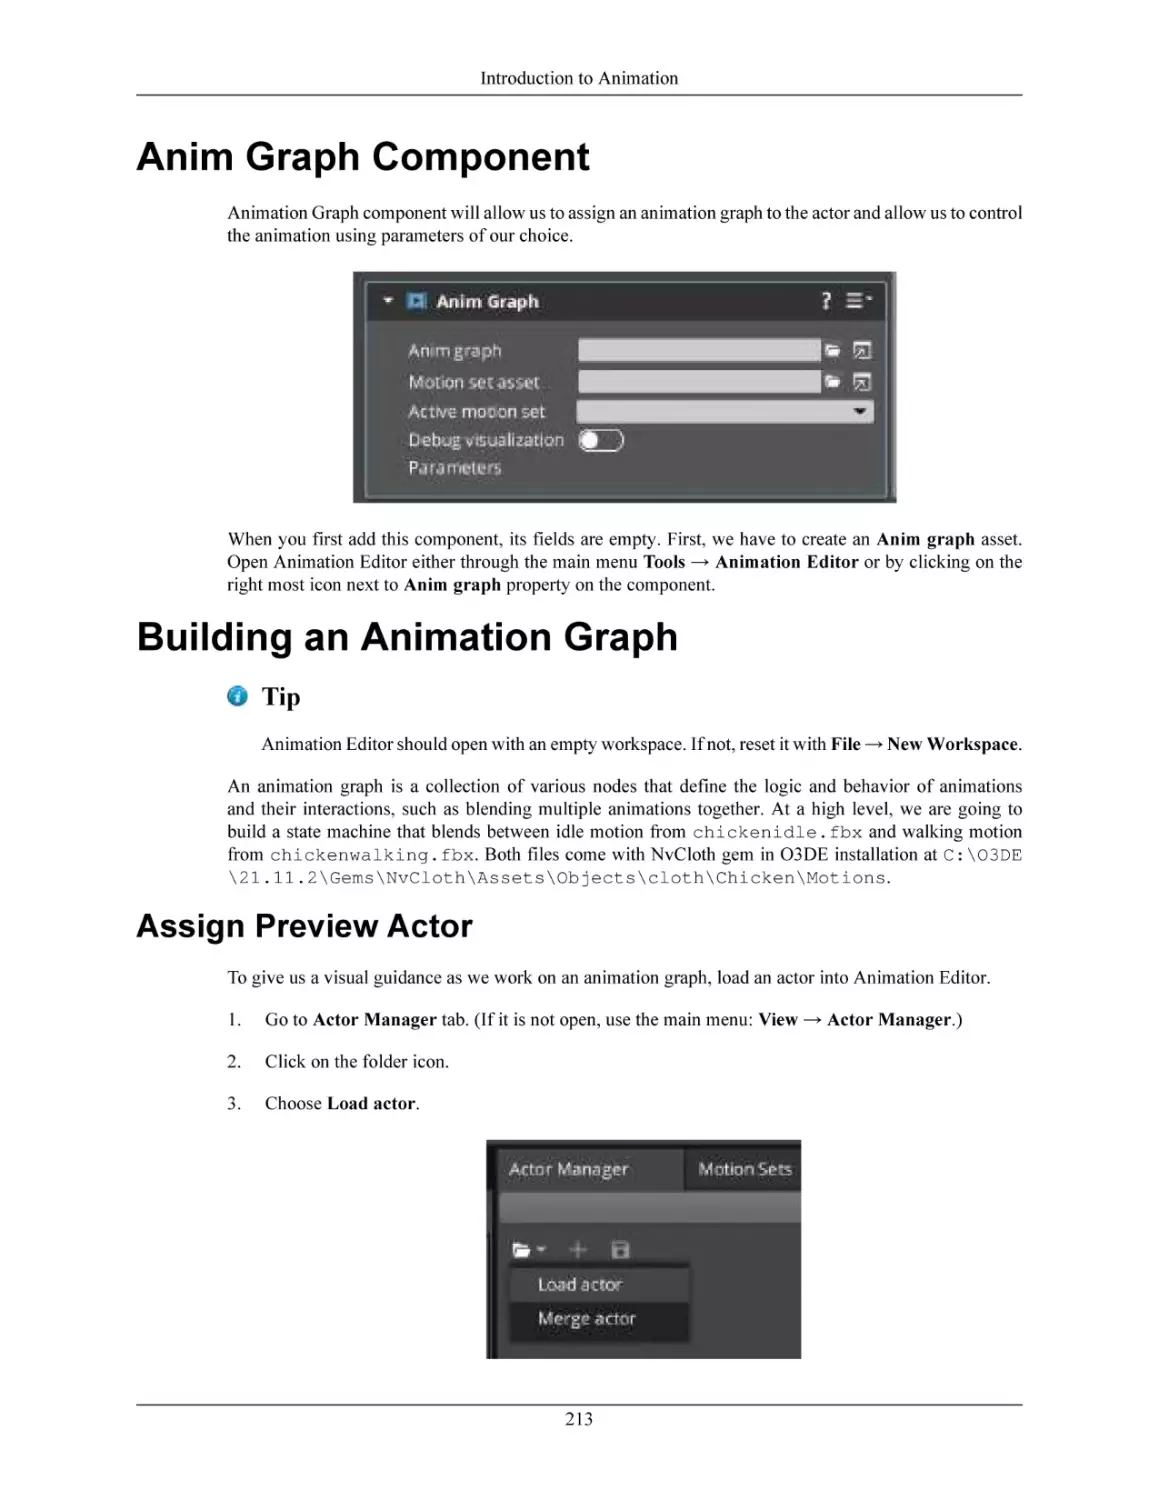 Anim Graph Component
Building an Animation Graph
Assign Preview Actor